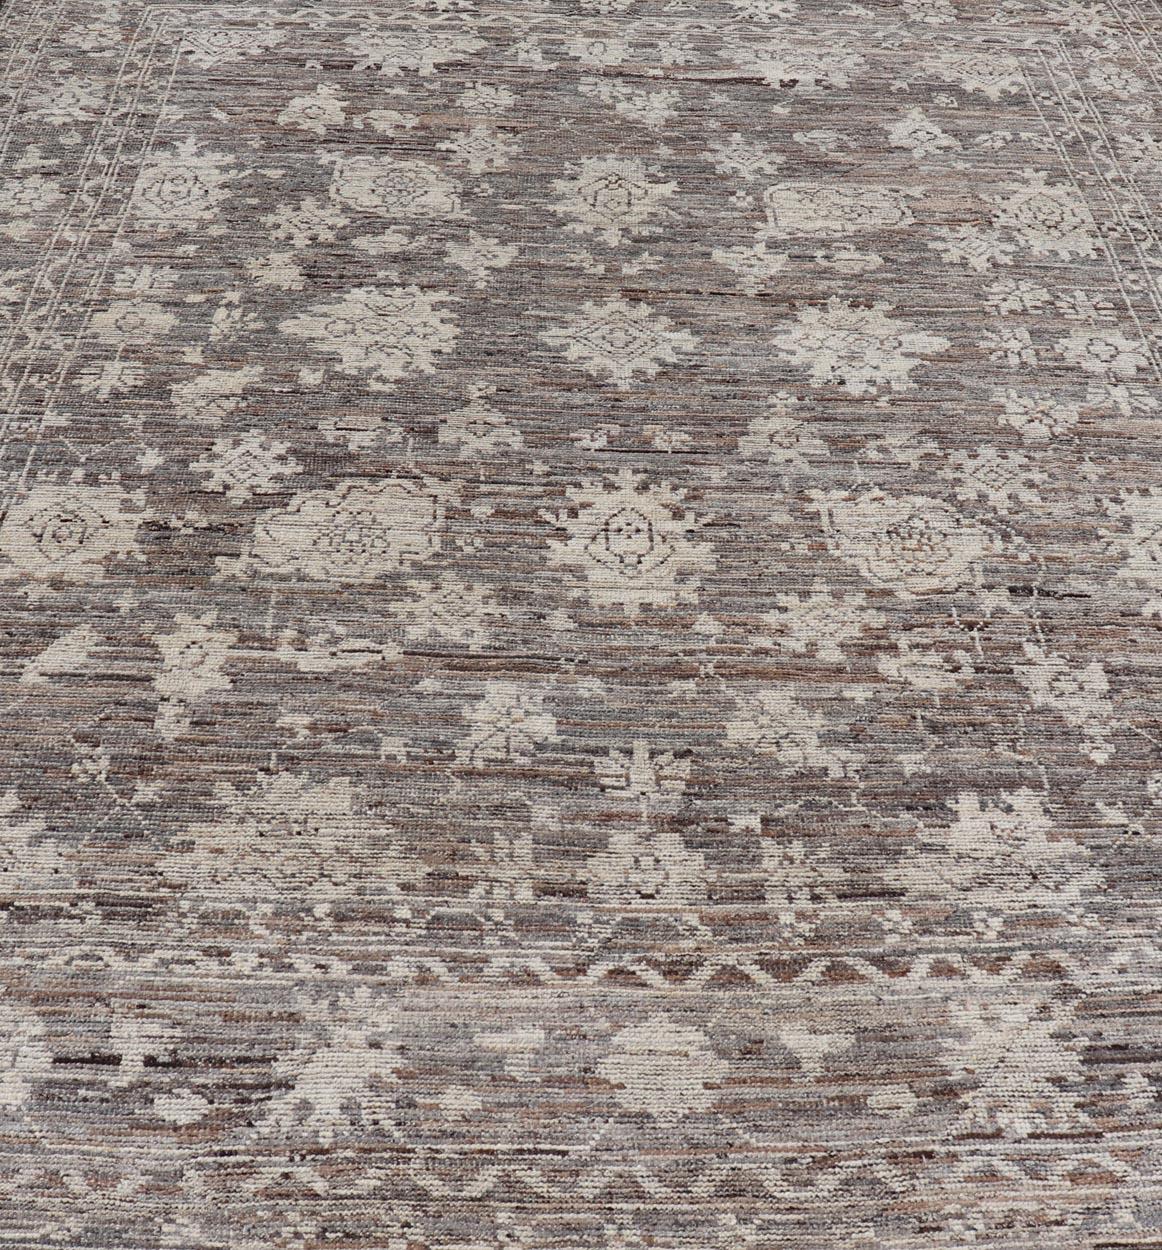 This modern casual tribal Oushak designed rug has been hand-knotted in wool. The rug features a modern sub-geometric floral design which is enclosed within a complementary, multi-tiered border. The rug is rendered in brown, cream and Earthy Tones;